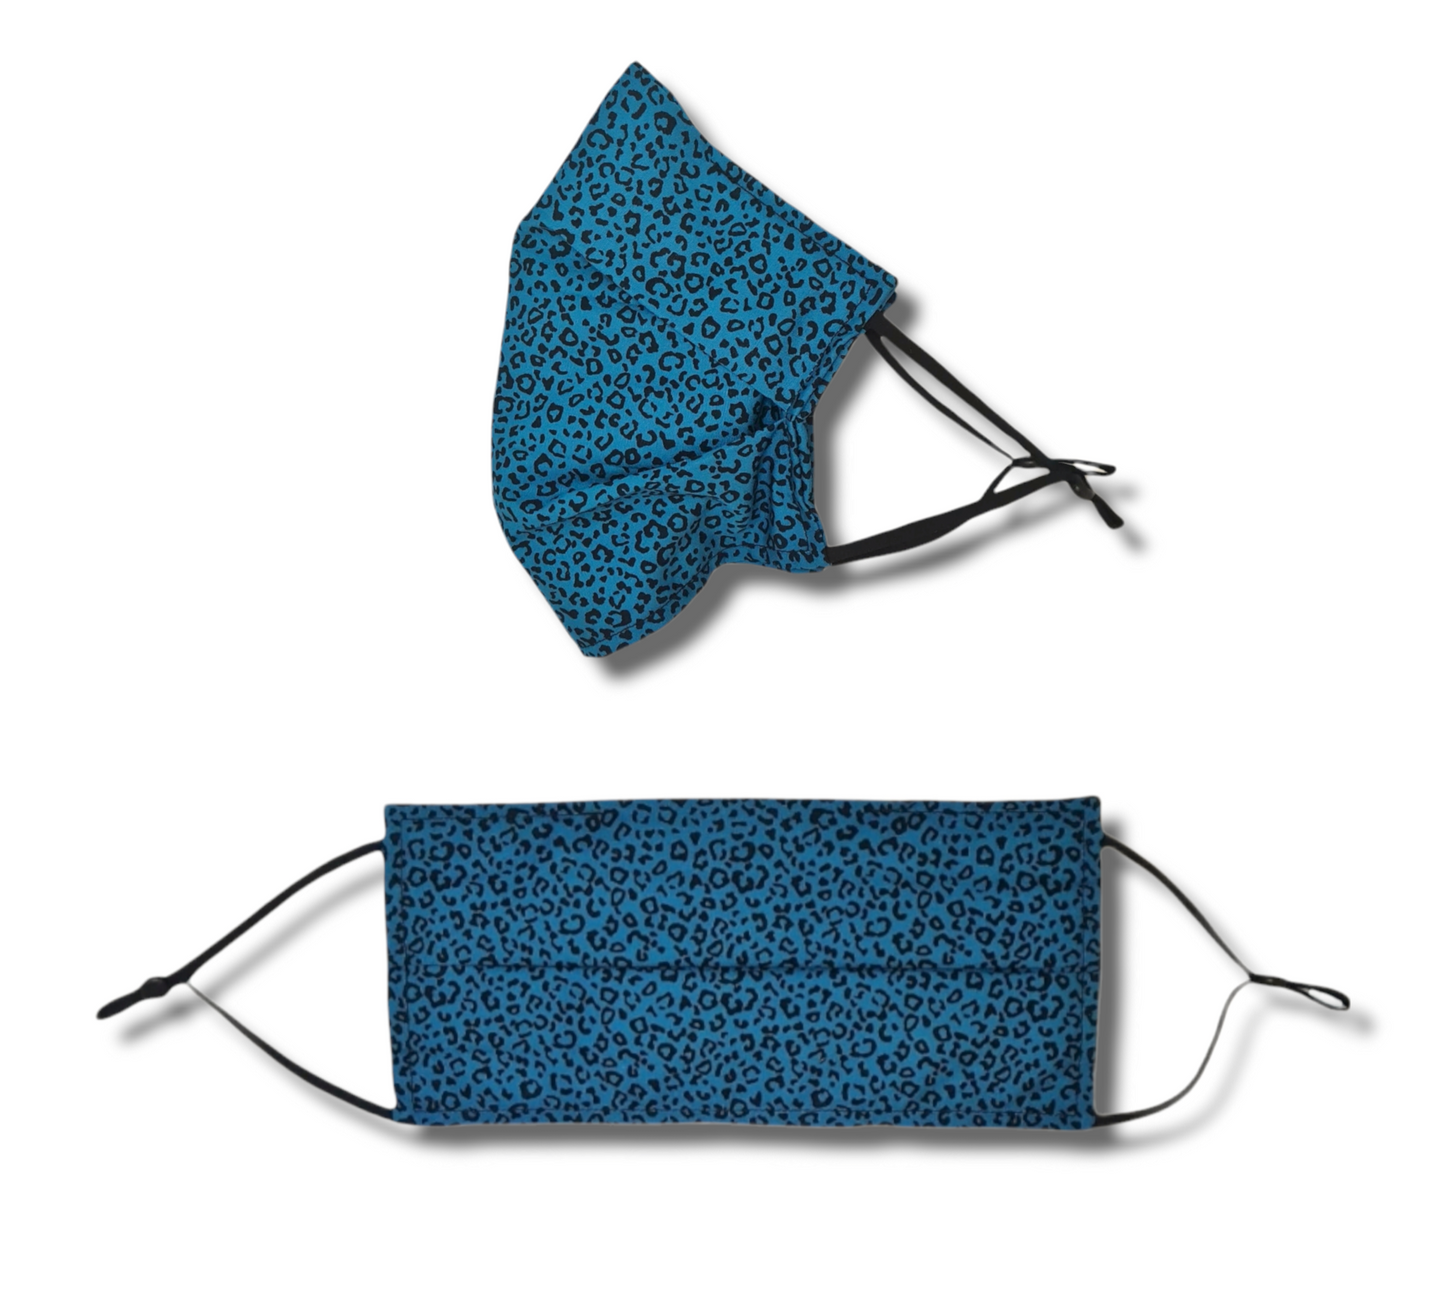 Blue Leopard print face mask. Washable and reusable with filter pocket. Adjustable elastic ear loops with toggle adjustment.